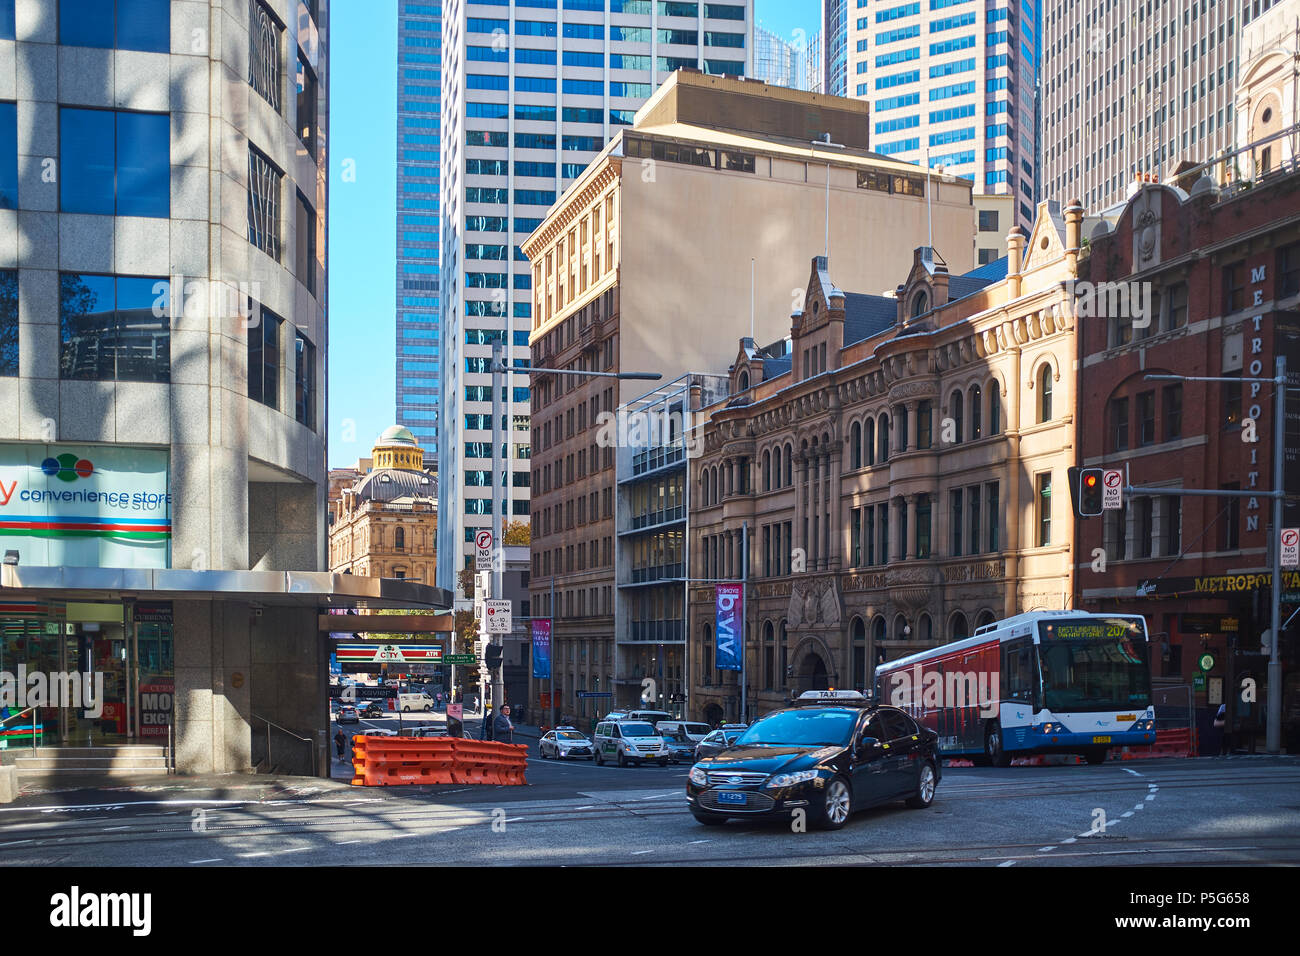 A view of Bridge Street from George Street in the early morning sun with traffic showing the old and new buildings of Sydney, NSW, Australia Stock Photo